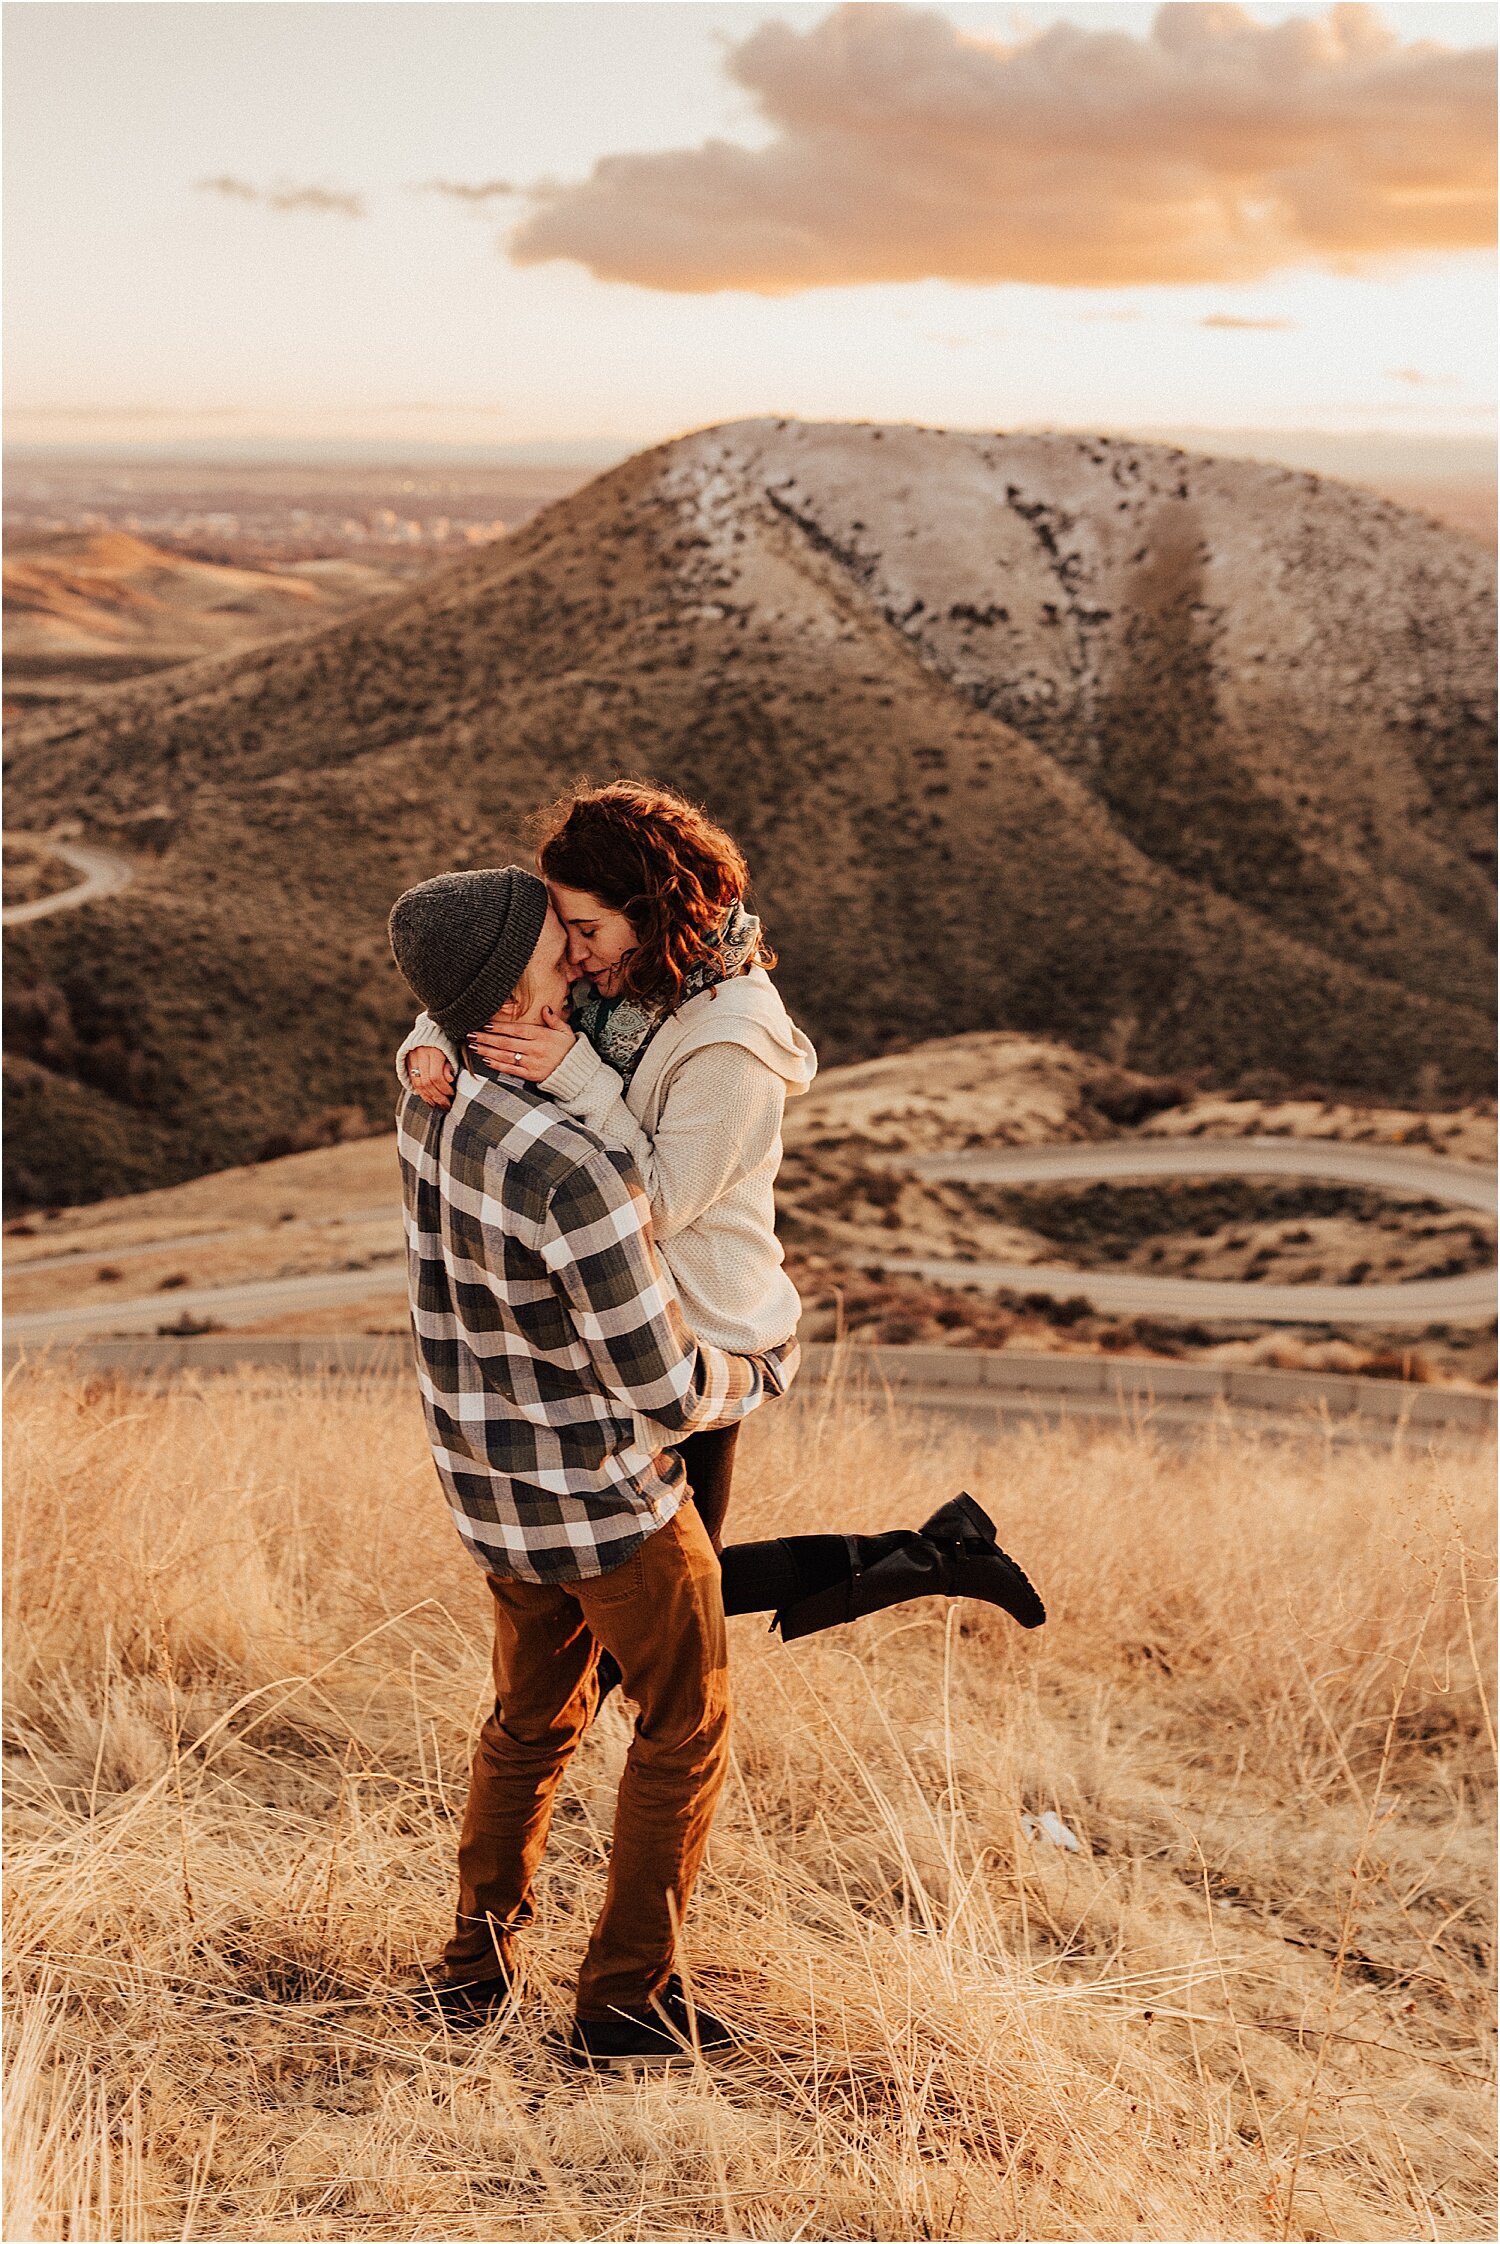 brewery foothills winter engagement session boise idaho23.jpg